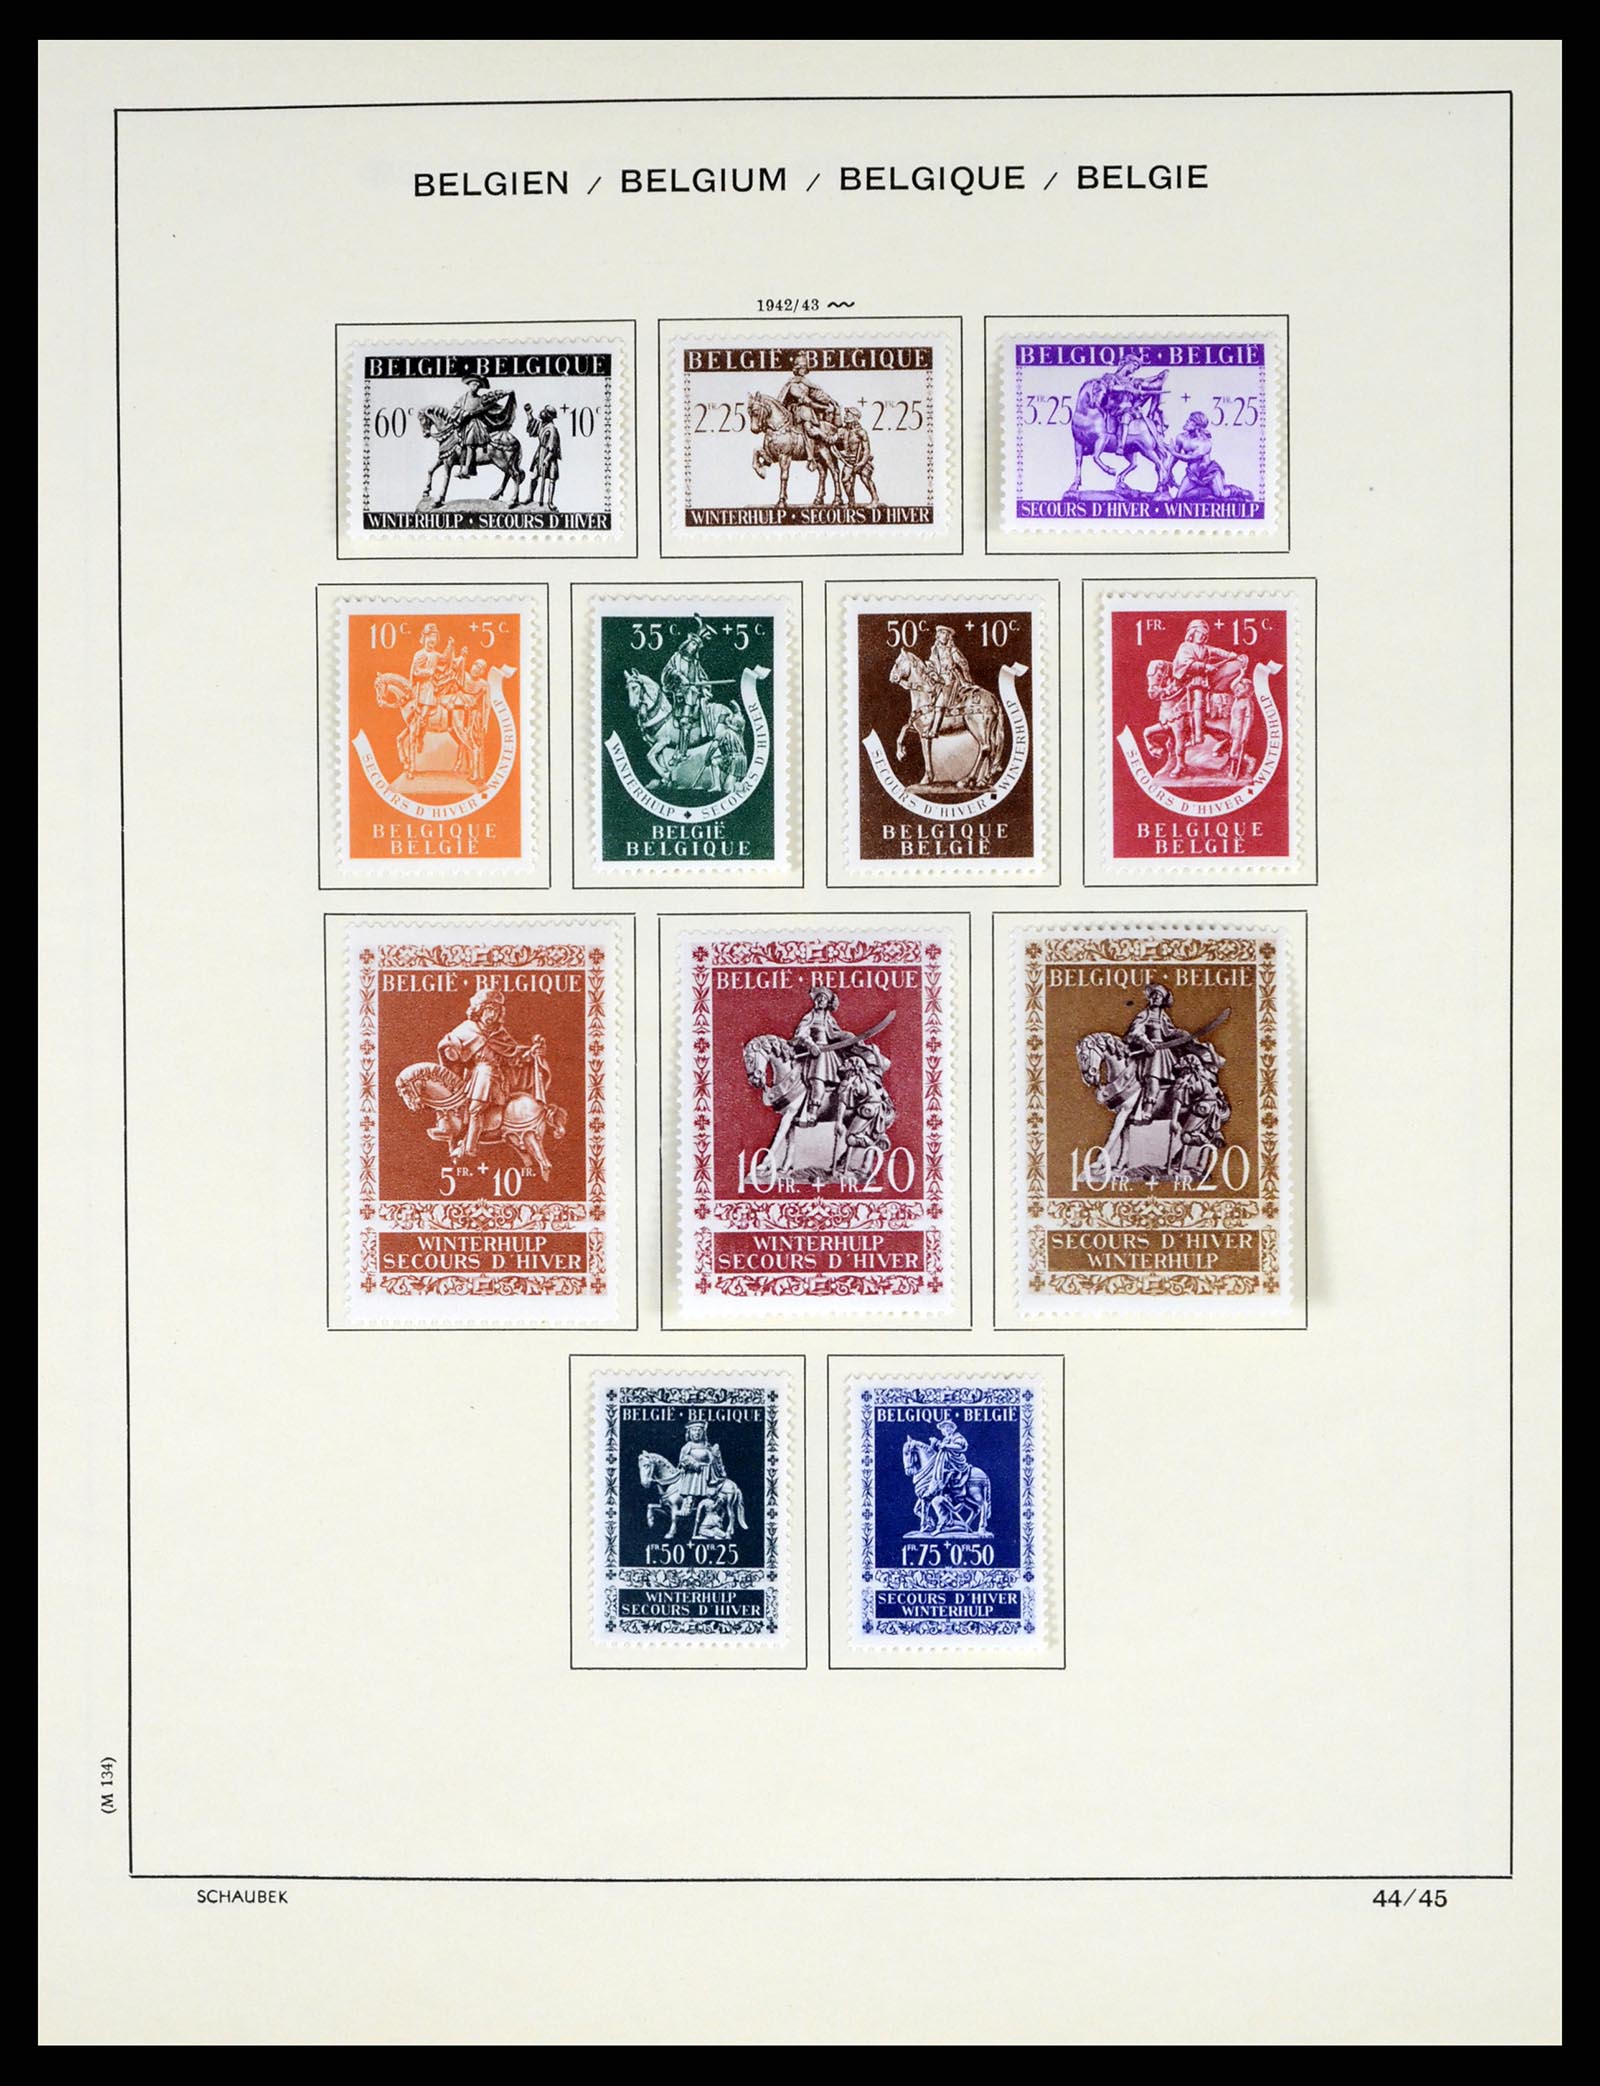 37595 054 - Stamp collection 37595 Super collection Belgium 1849-2015!